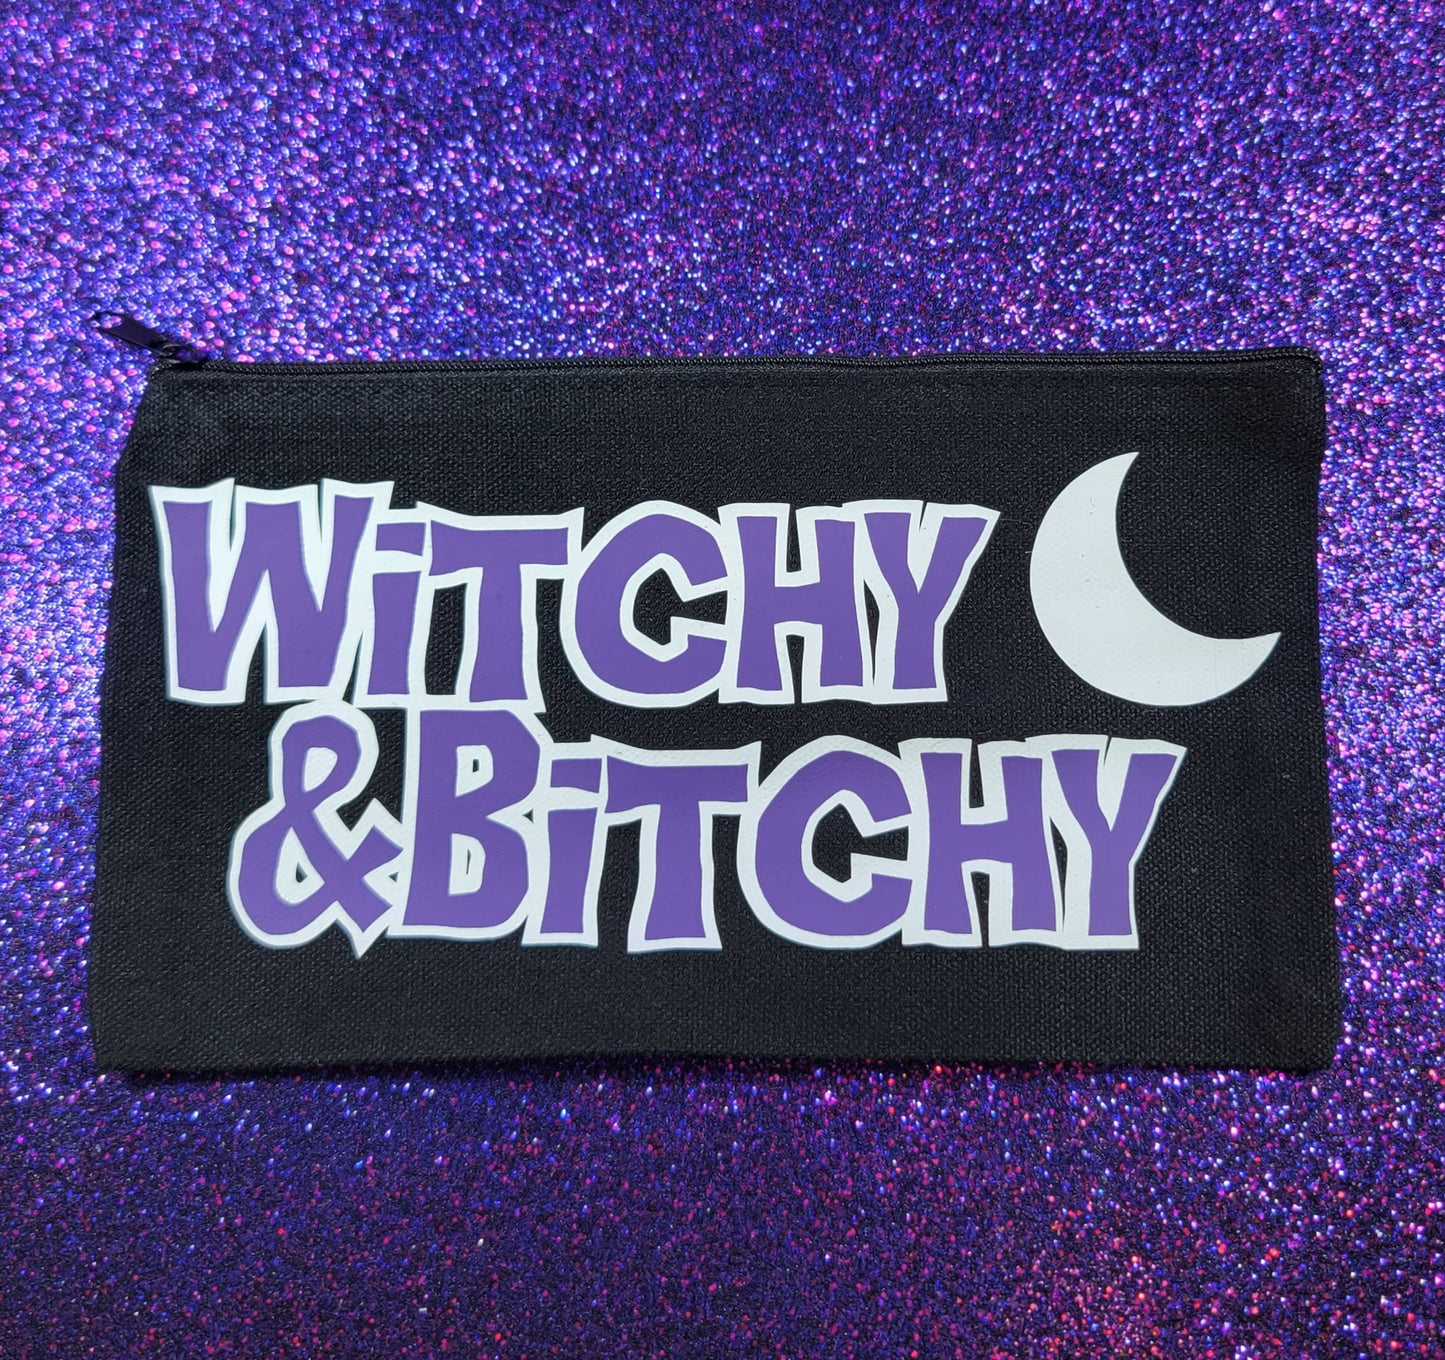 Witchy and Bitchy Zippered Pouch, Makeup Bag, Pencil Case 4.8"x8.4"